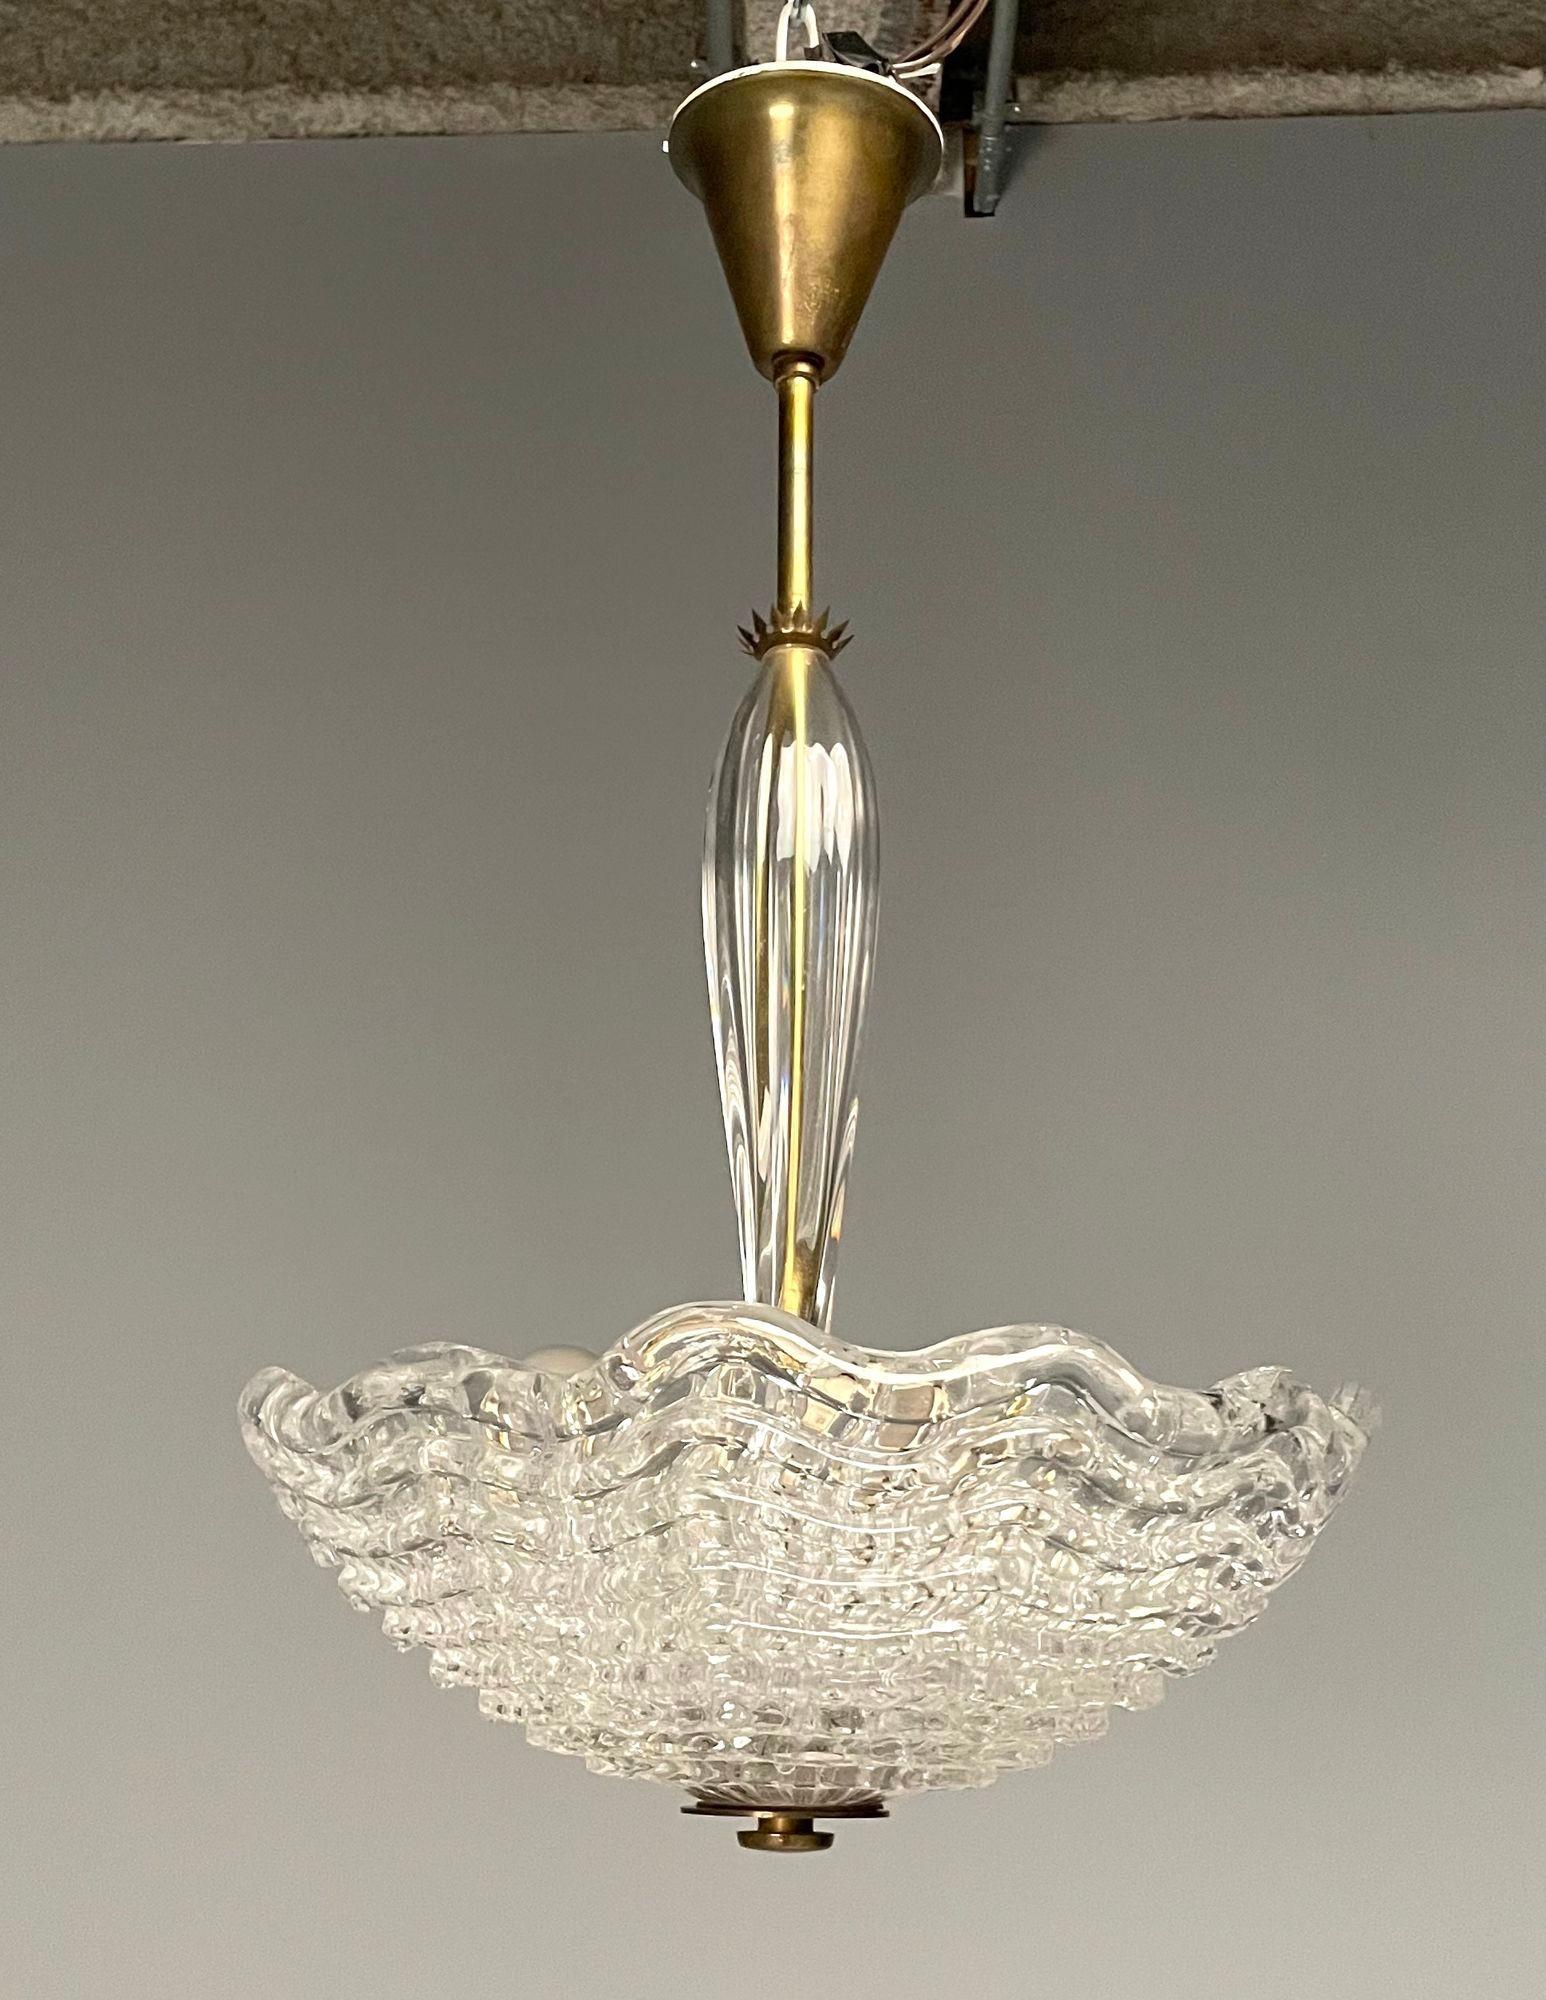 Carl Fagerlund, Orrefors, Swedish Mid-Century Modern, Chandelier, Glass, 1940s

Swedish modern chandelier or pendant designed by Carl Fagerlund for Orrefors in Sweden circa 1940s. This example features a brass stem fitted wtih a fluted glass table